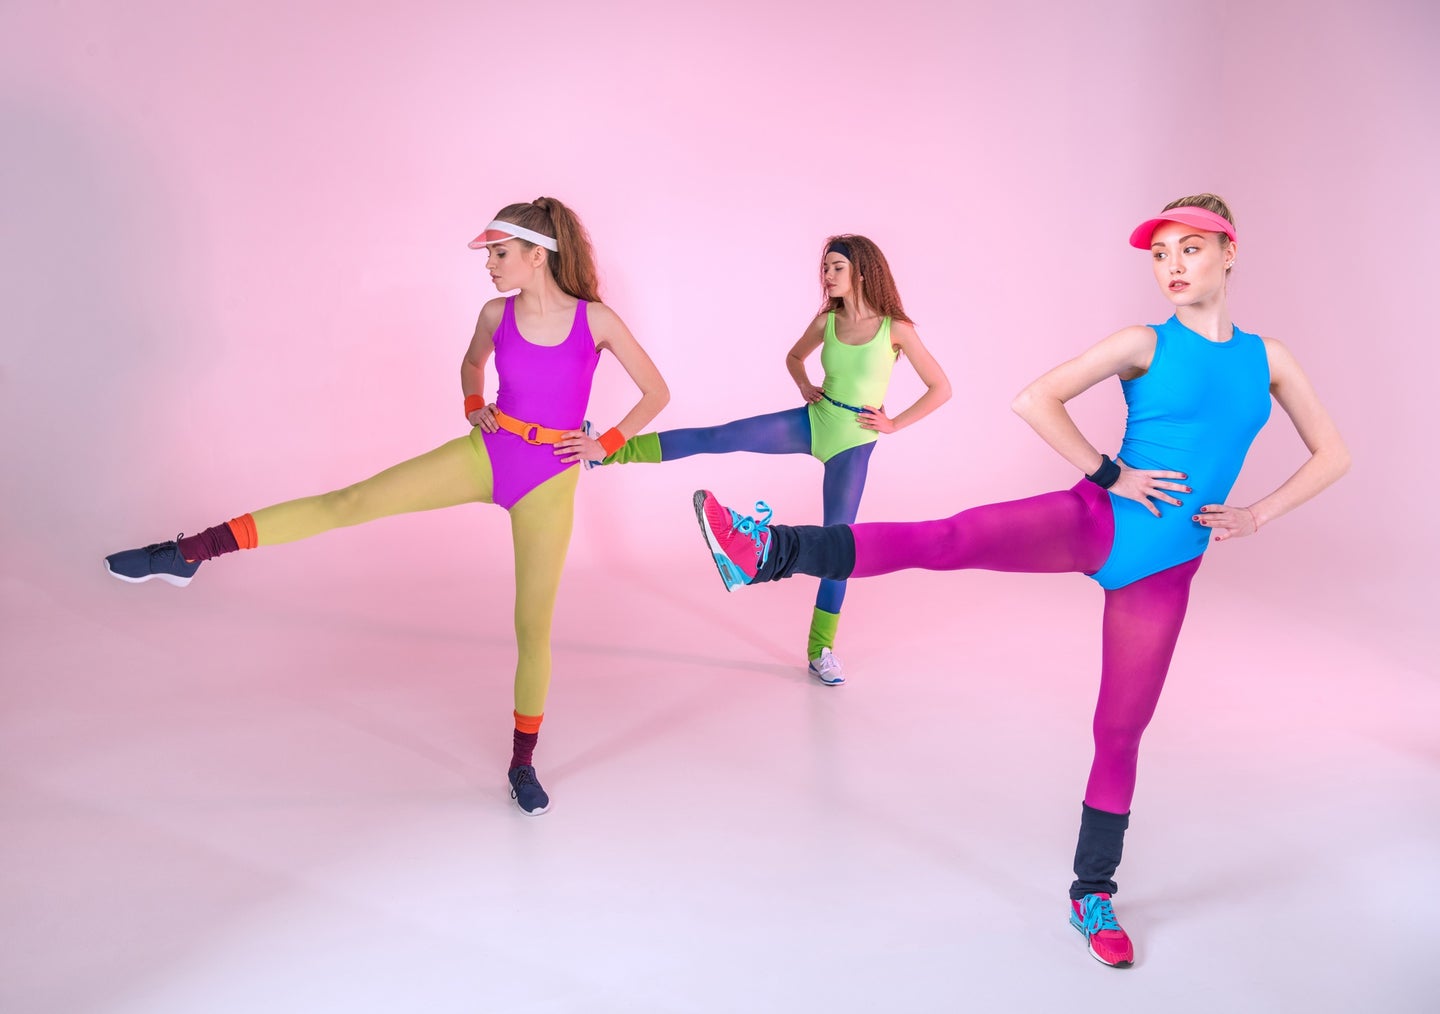 Three people in multicolored Lycra spandex exercise outfits in front of a light pink backdrop